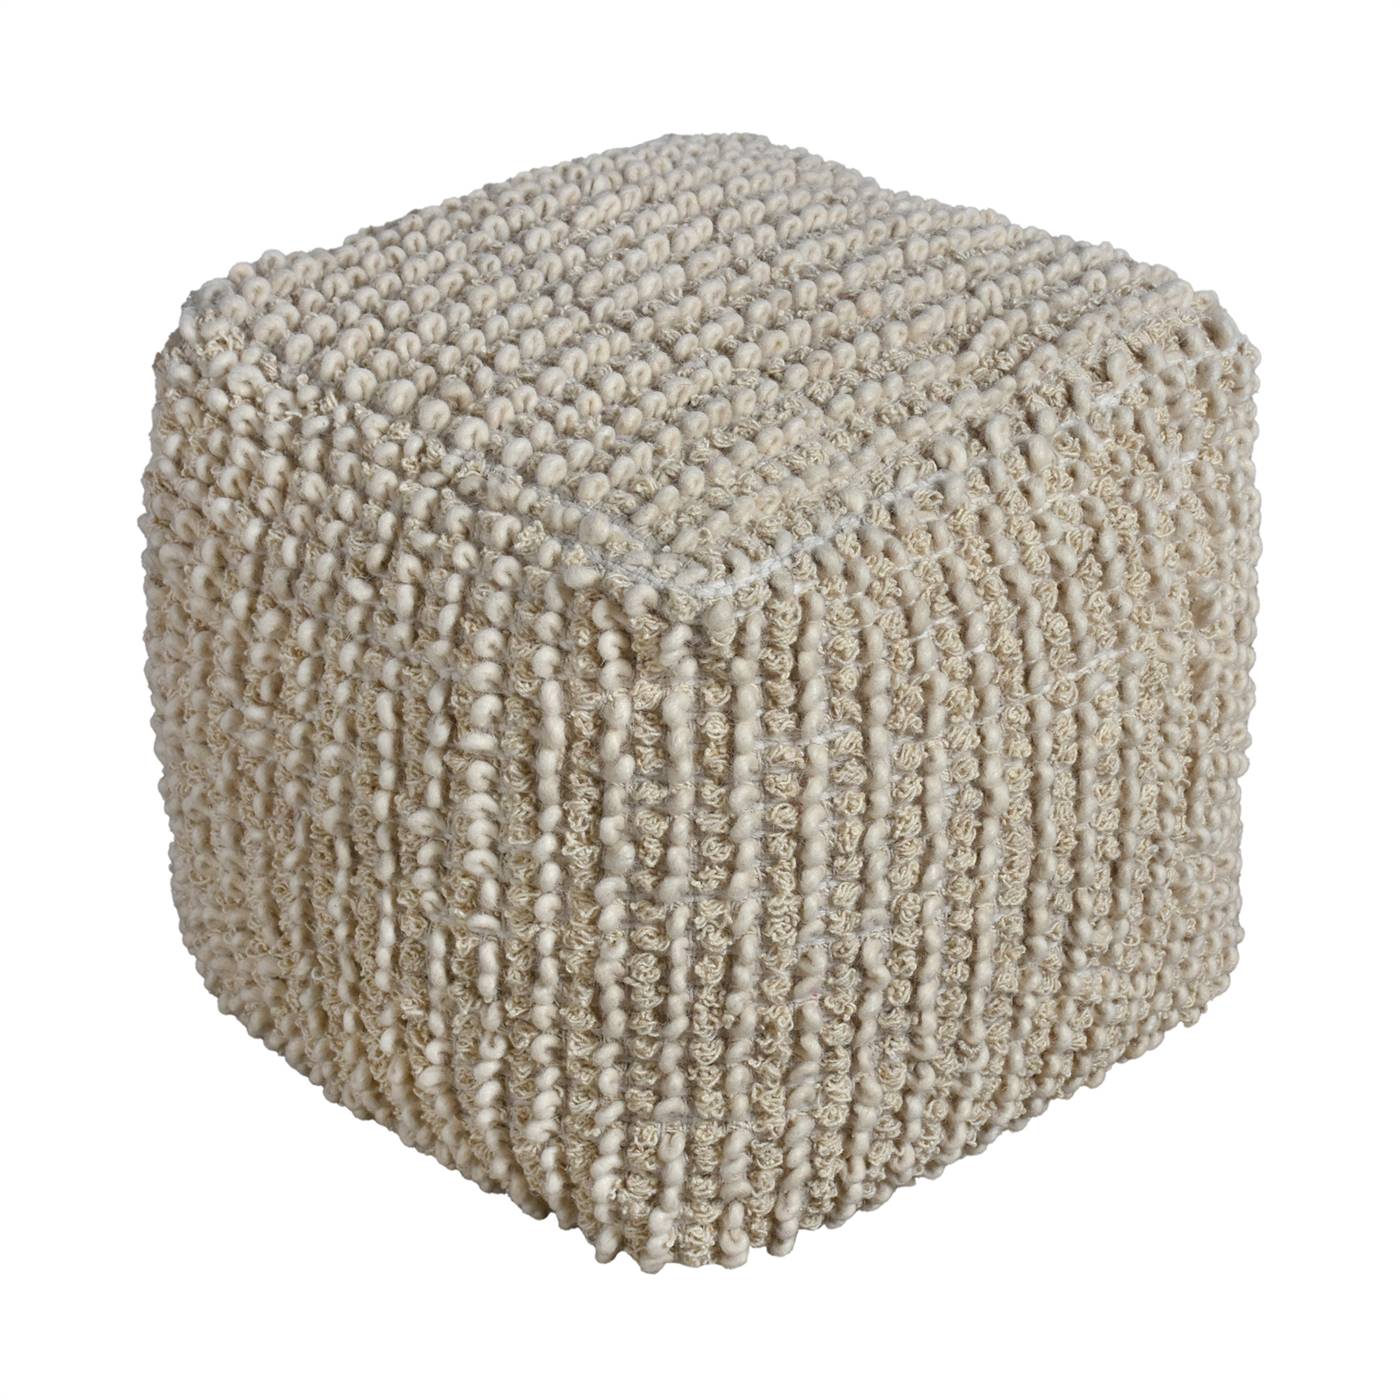 Avers Pouf, 40x40x40 cm, Natural White, Wool, Hand Woven, Pitloom, All Loop